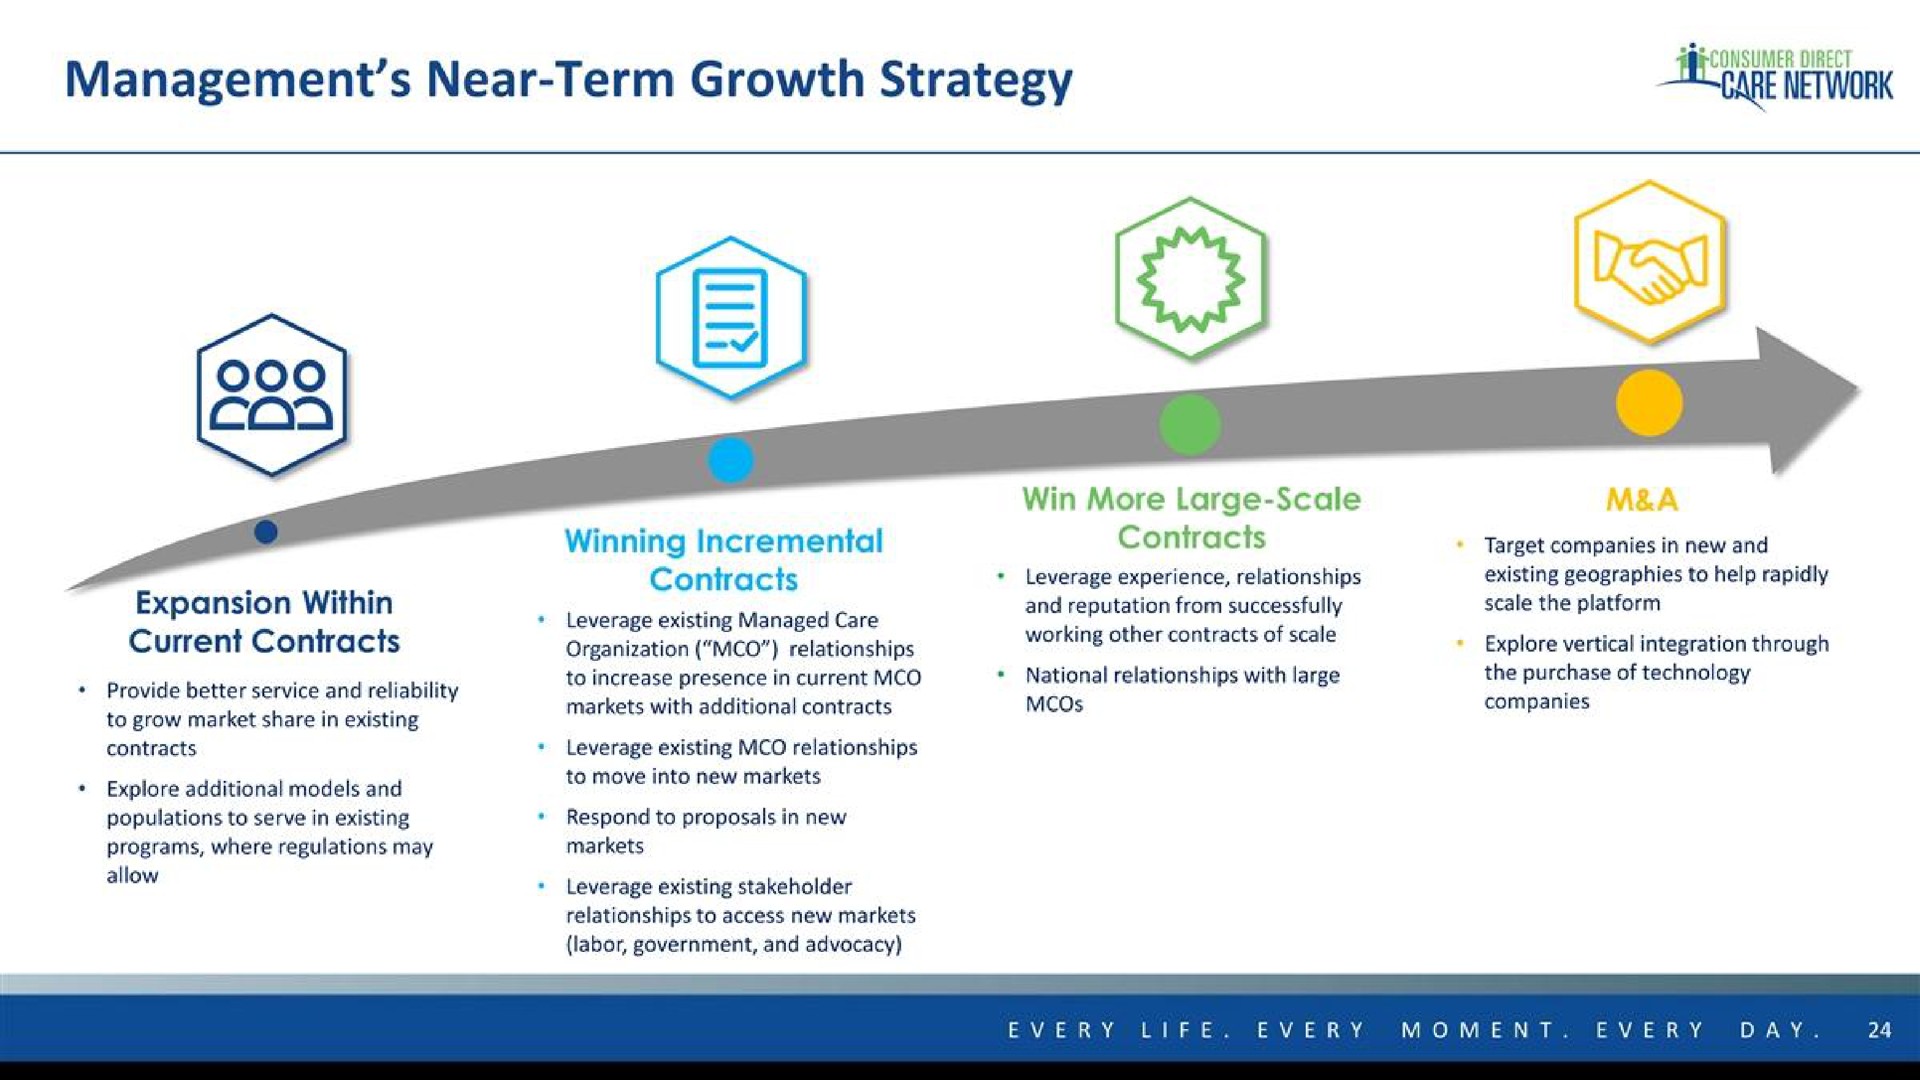 management near term growth strategy | Consumer Direct Care Network